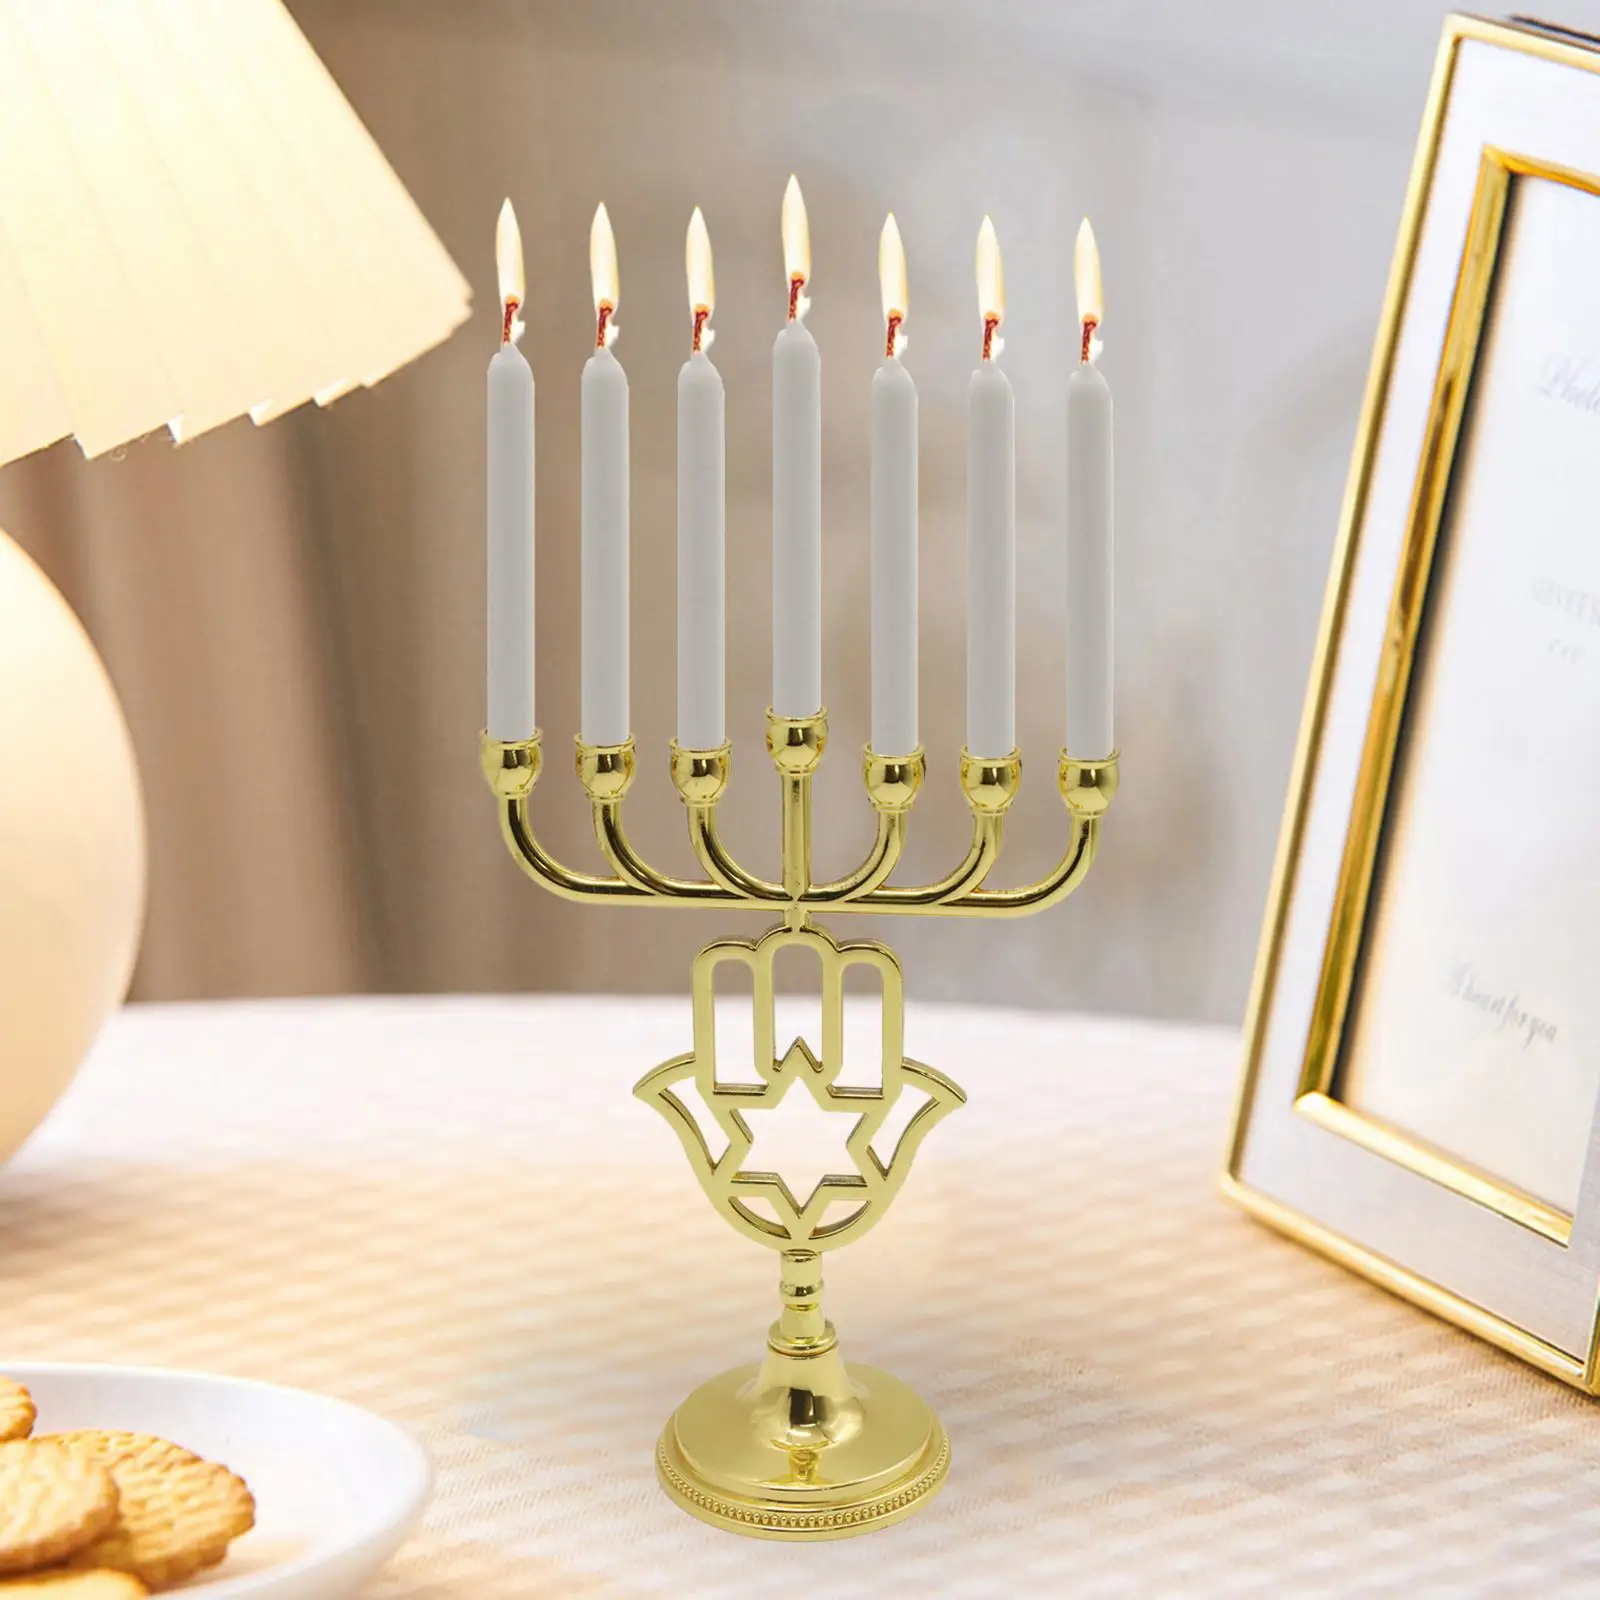 7 Branches Candle Holder Tabletop Hanukkah Menorah Ornament Candle Stands for Wedding Party New Year Home Decor